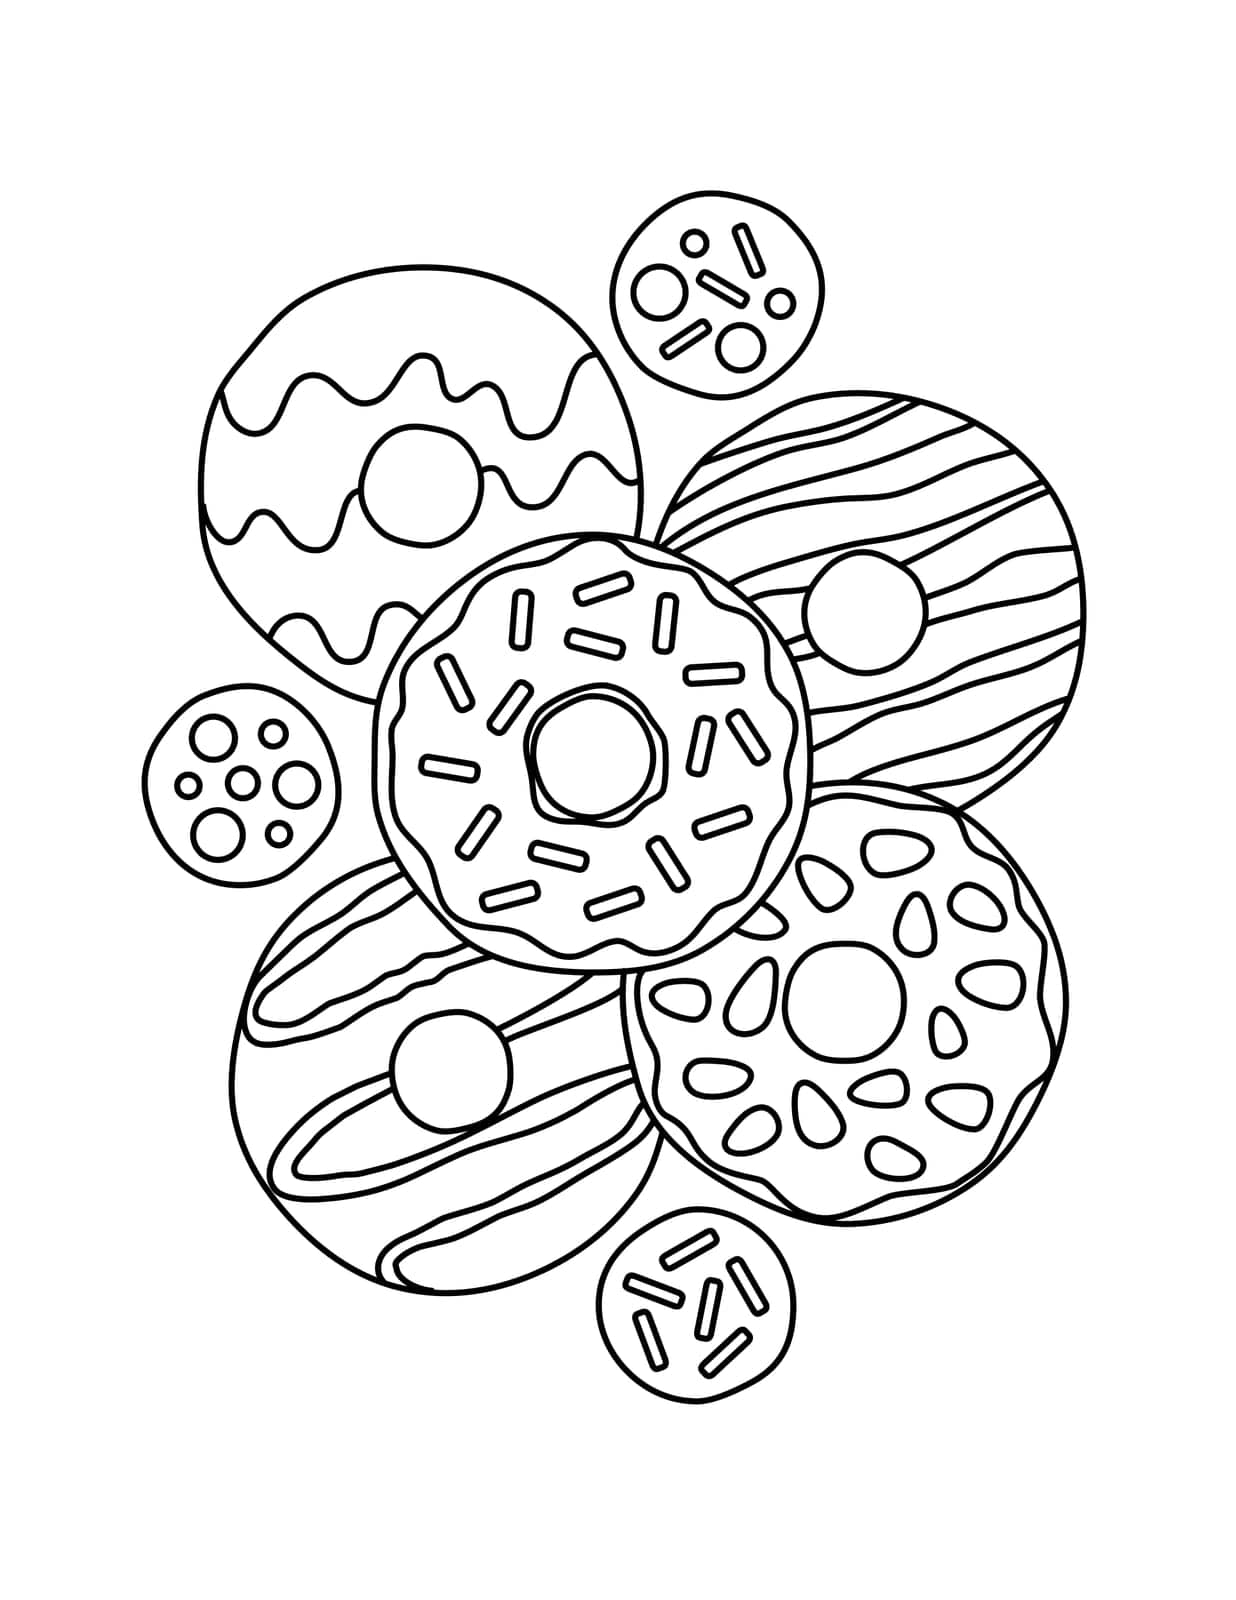 Cute Donut Black Outline Coloring Page by JuneYap